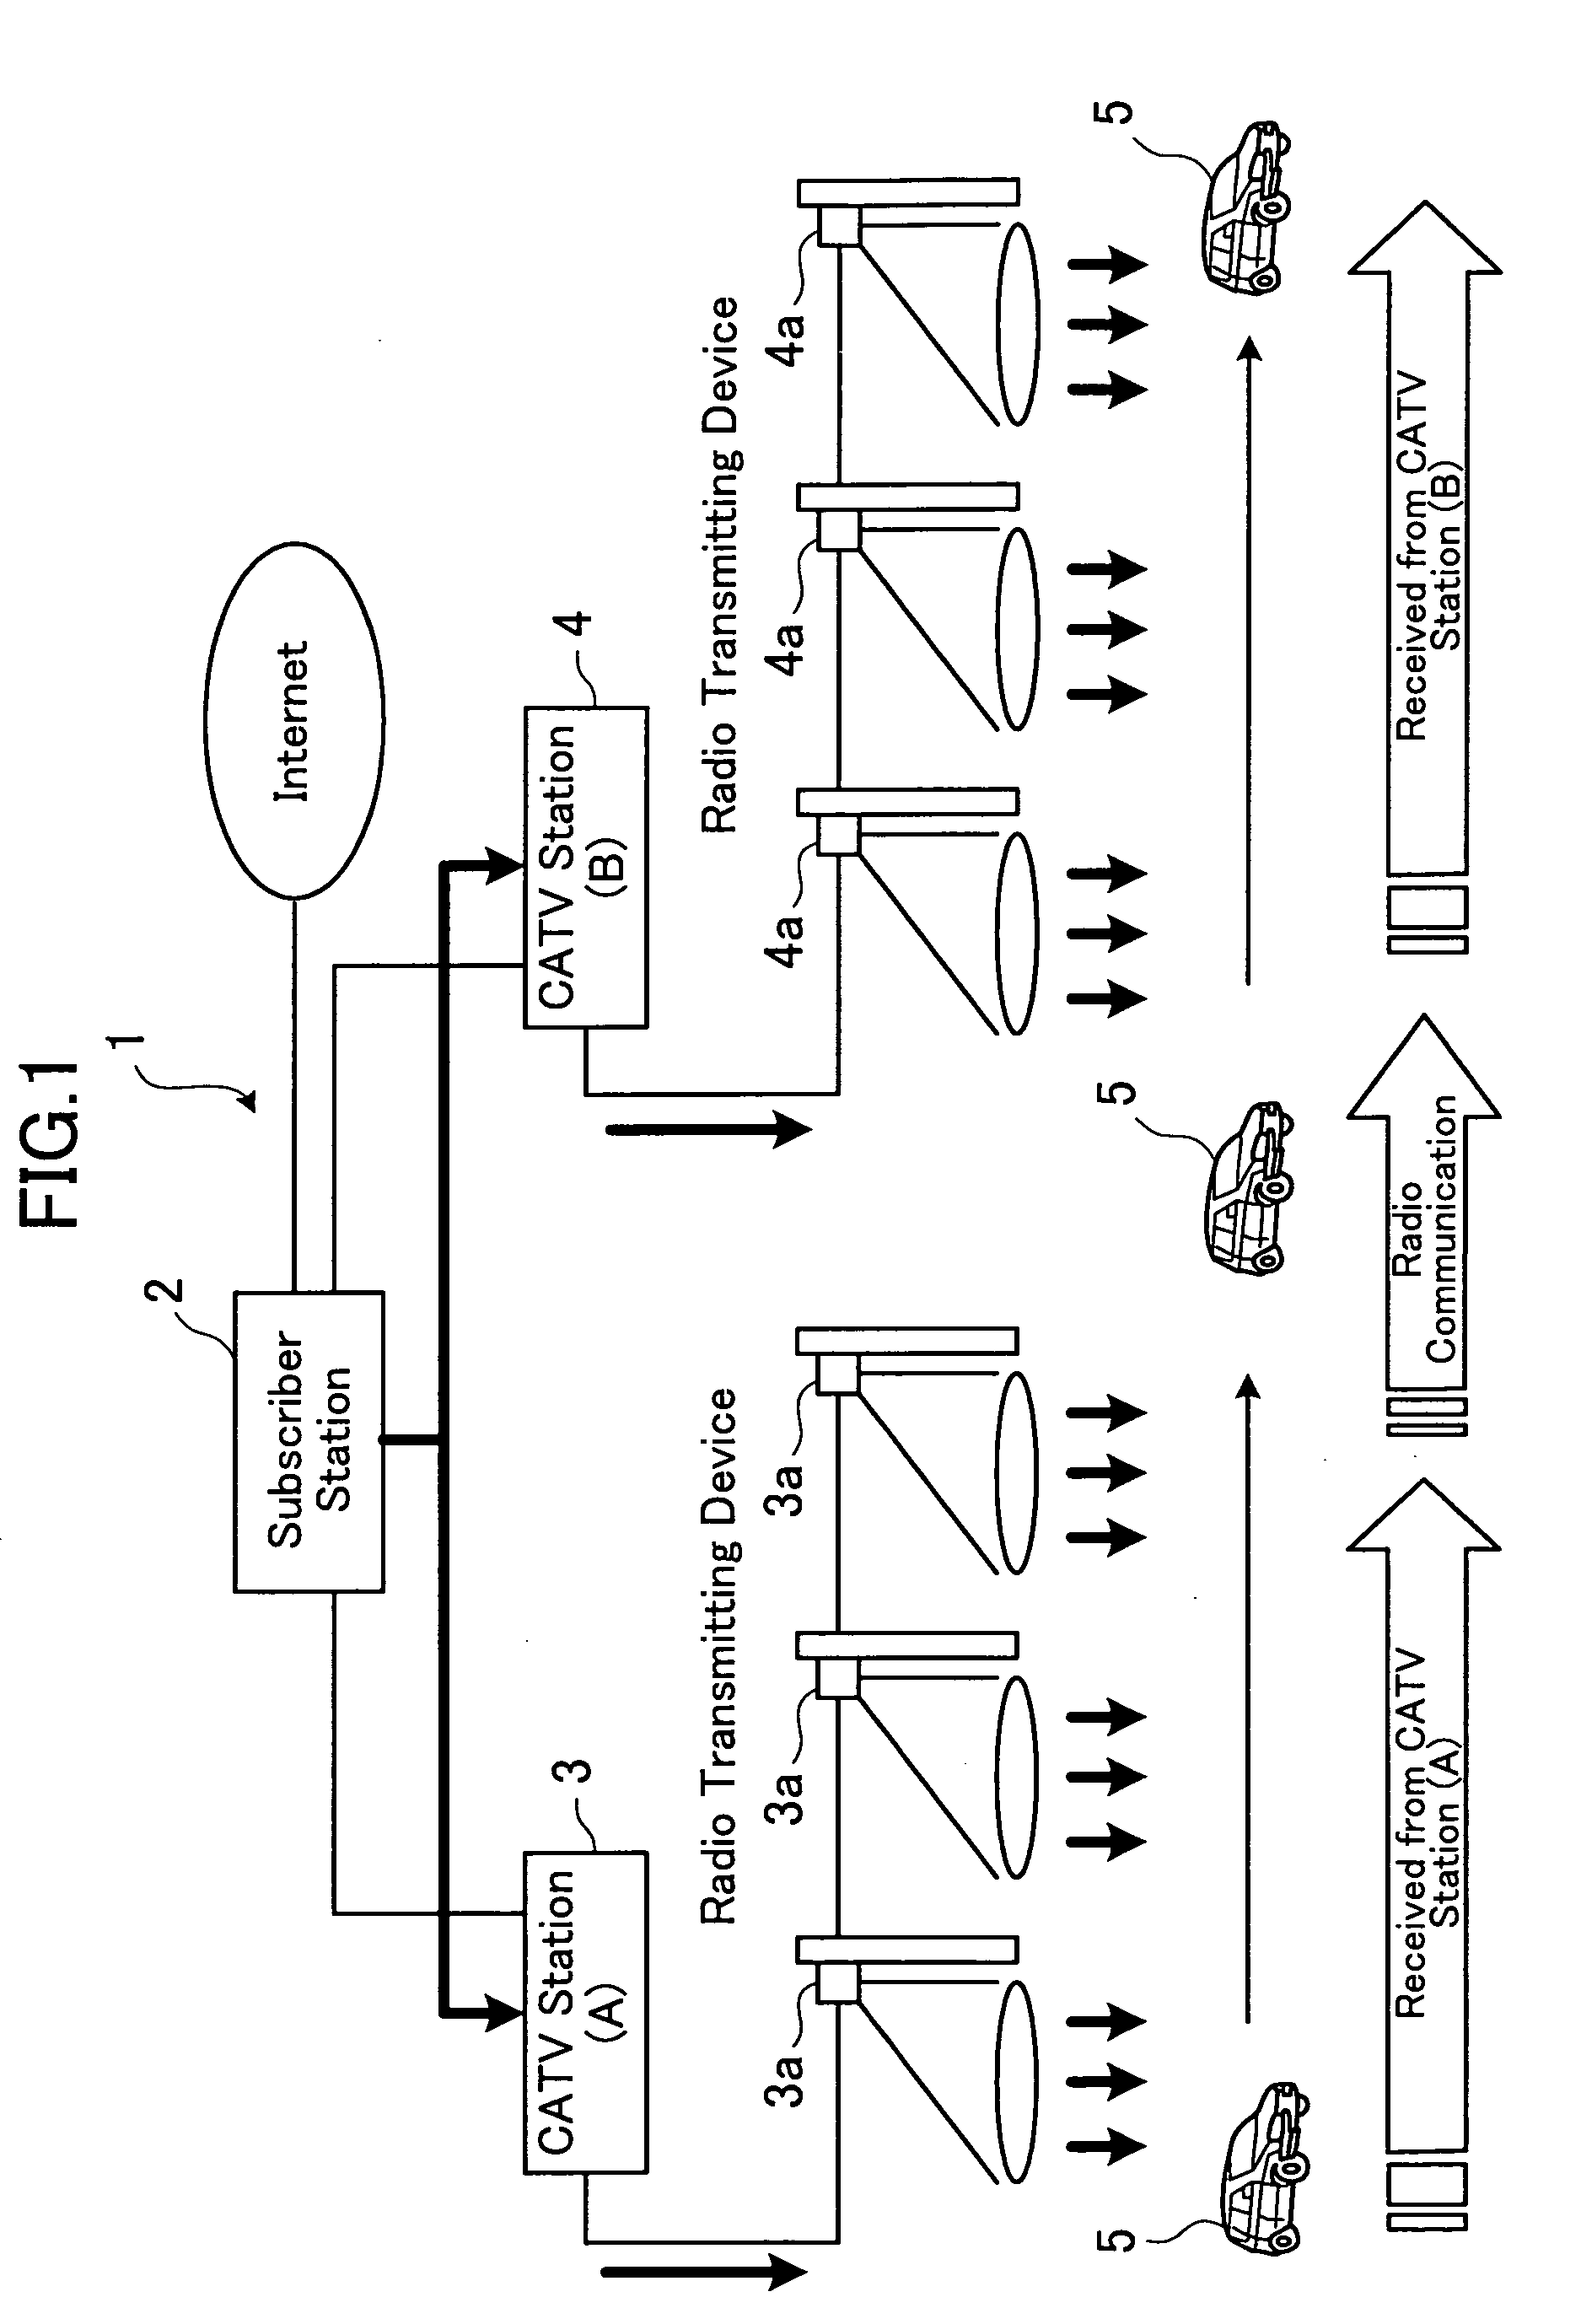 Mobile communication terminal recognition system and mobile communication terminal recognition method using the system